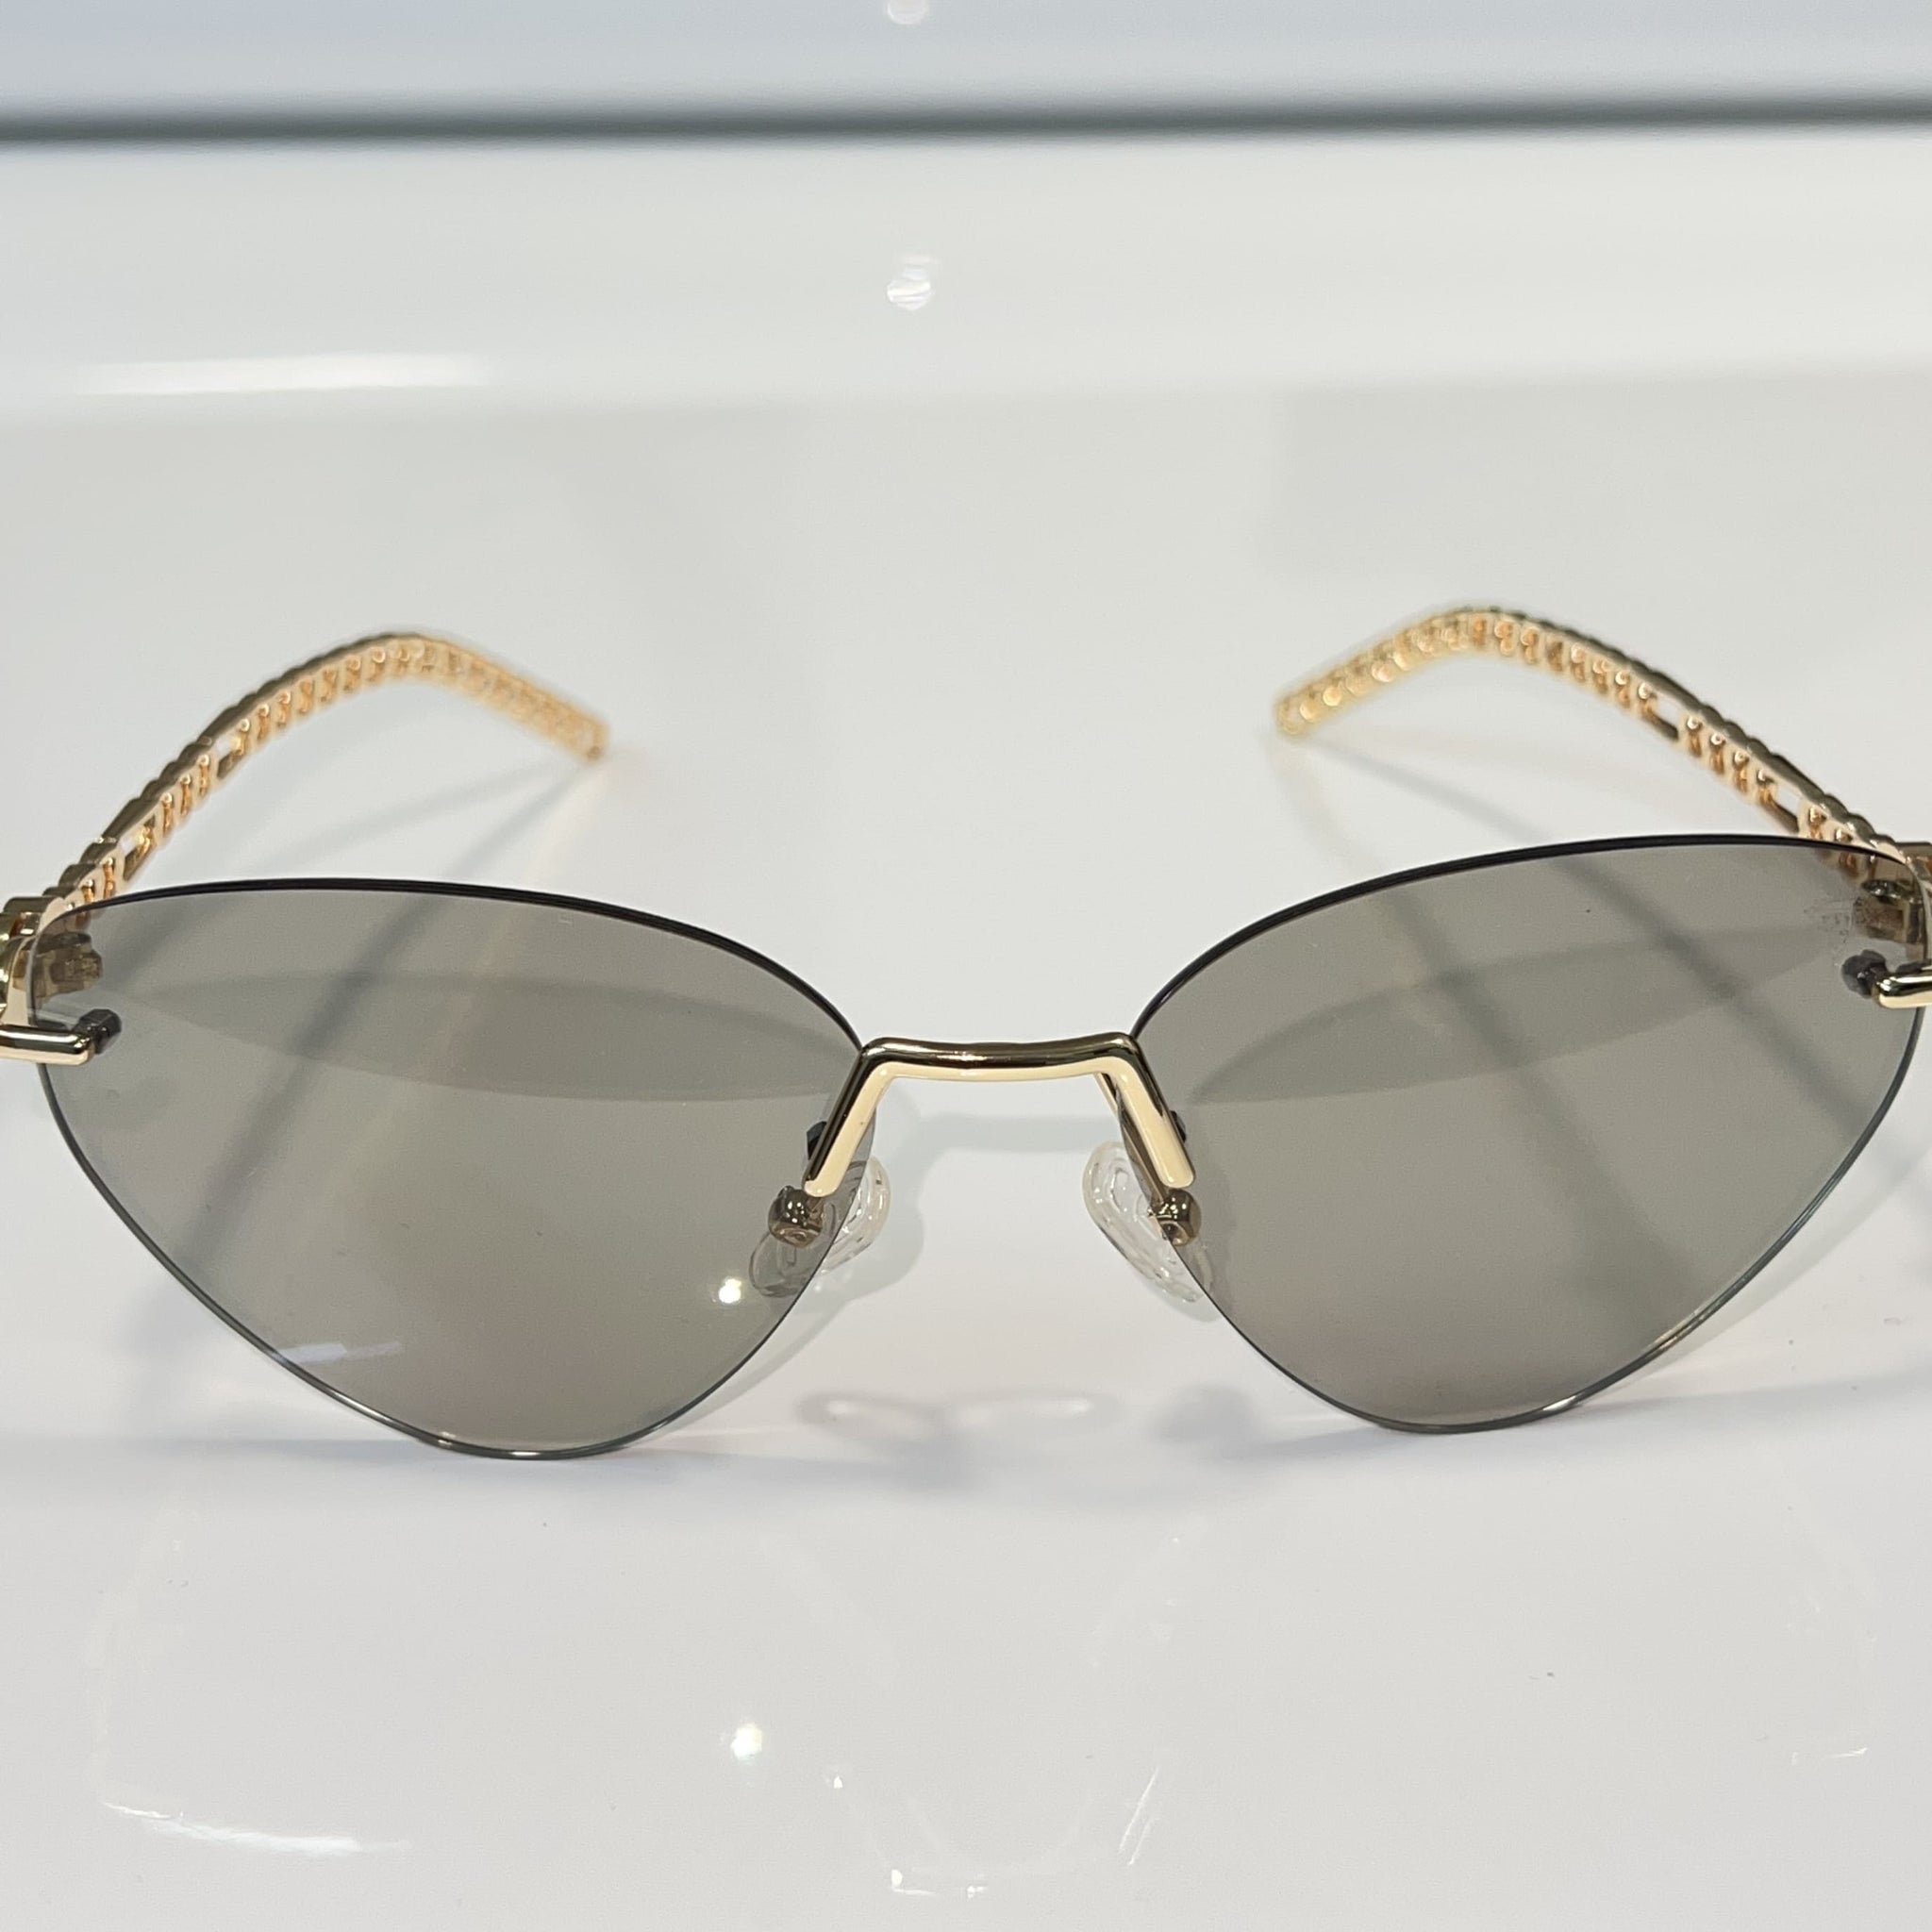 Pearl 'For Her' Glasses - 14k gold plated - Grey Shade - Sehgal Glasses